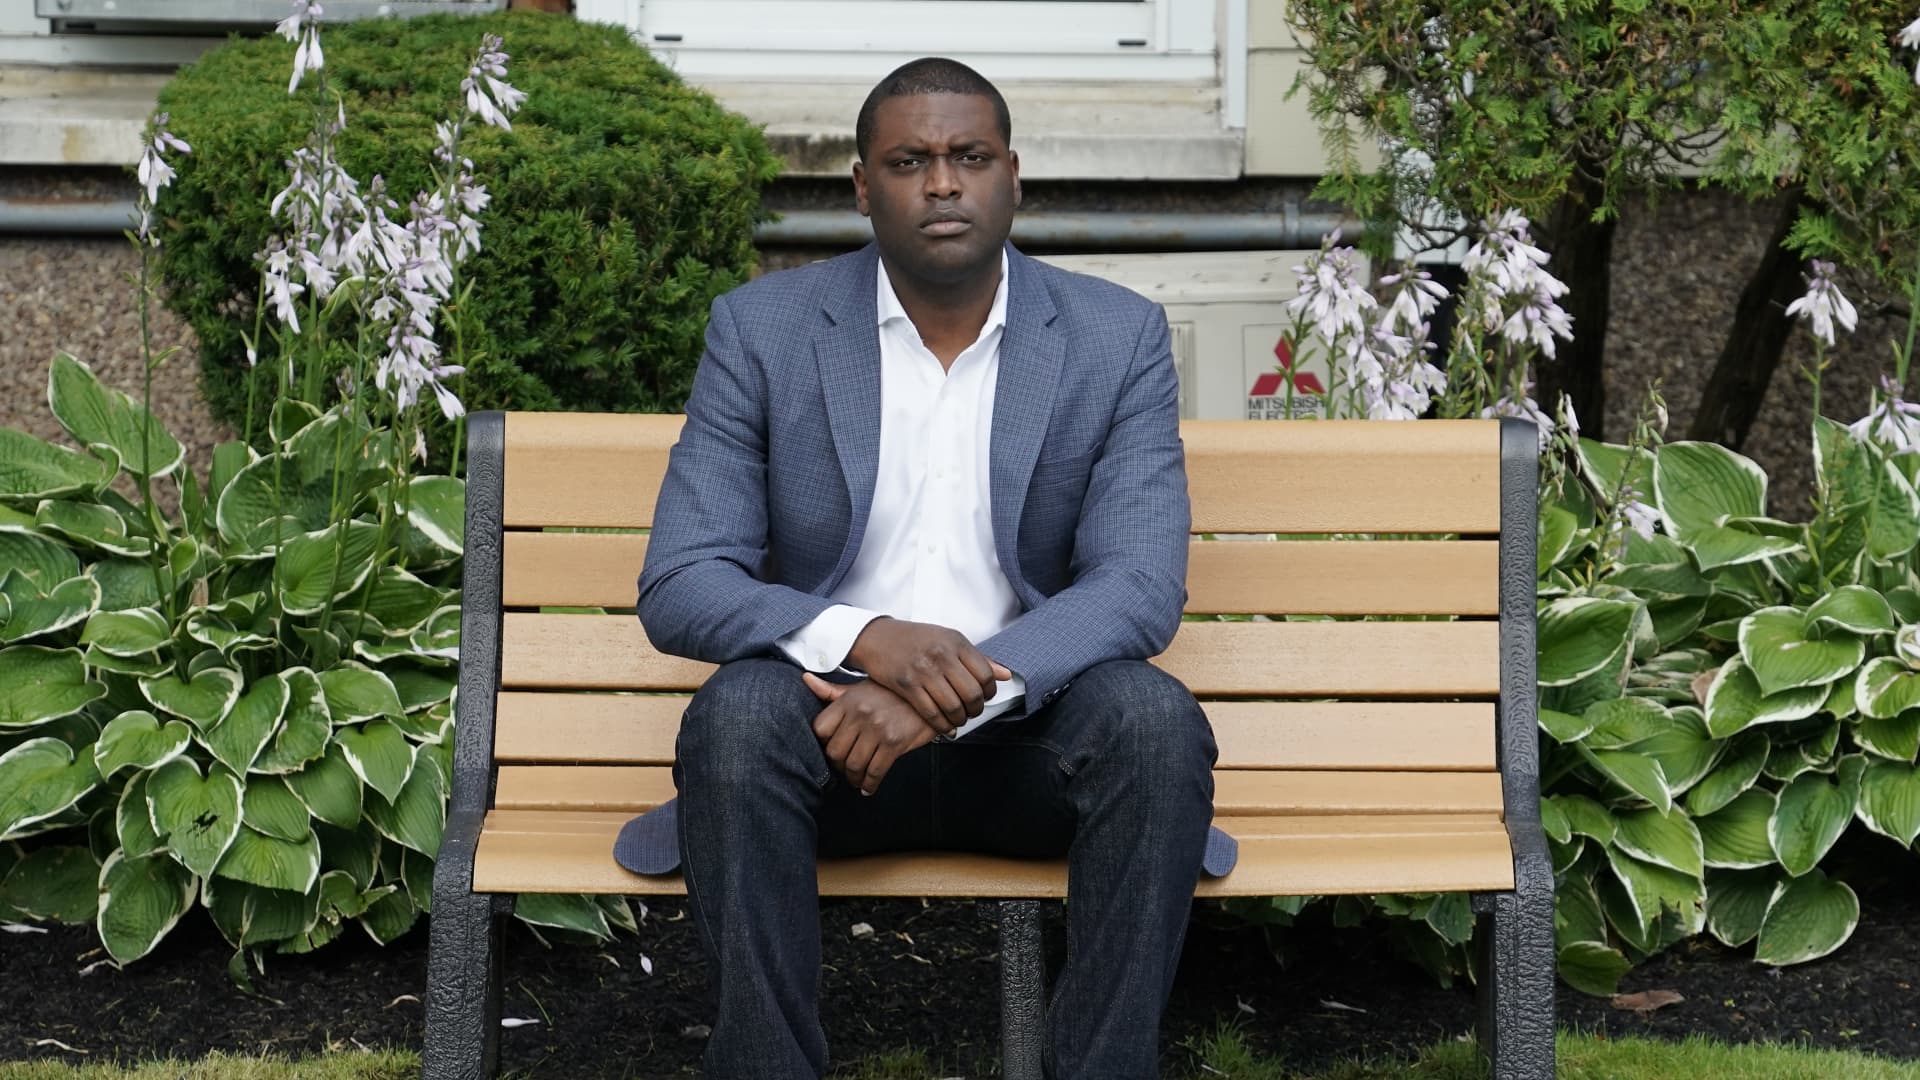 Mondaire Jones, the Democratic candidate for New York's 17th Congressional District, poses outside his home in Nyack, New York, July 23, 2020. - Jones, 33, has won the Democratic primaries in his district. If he wins the November 3rd election as anticipated, he will become the first Black, openly gay representative in US Congress, together with Ritchie Torres from the Bronx.